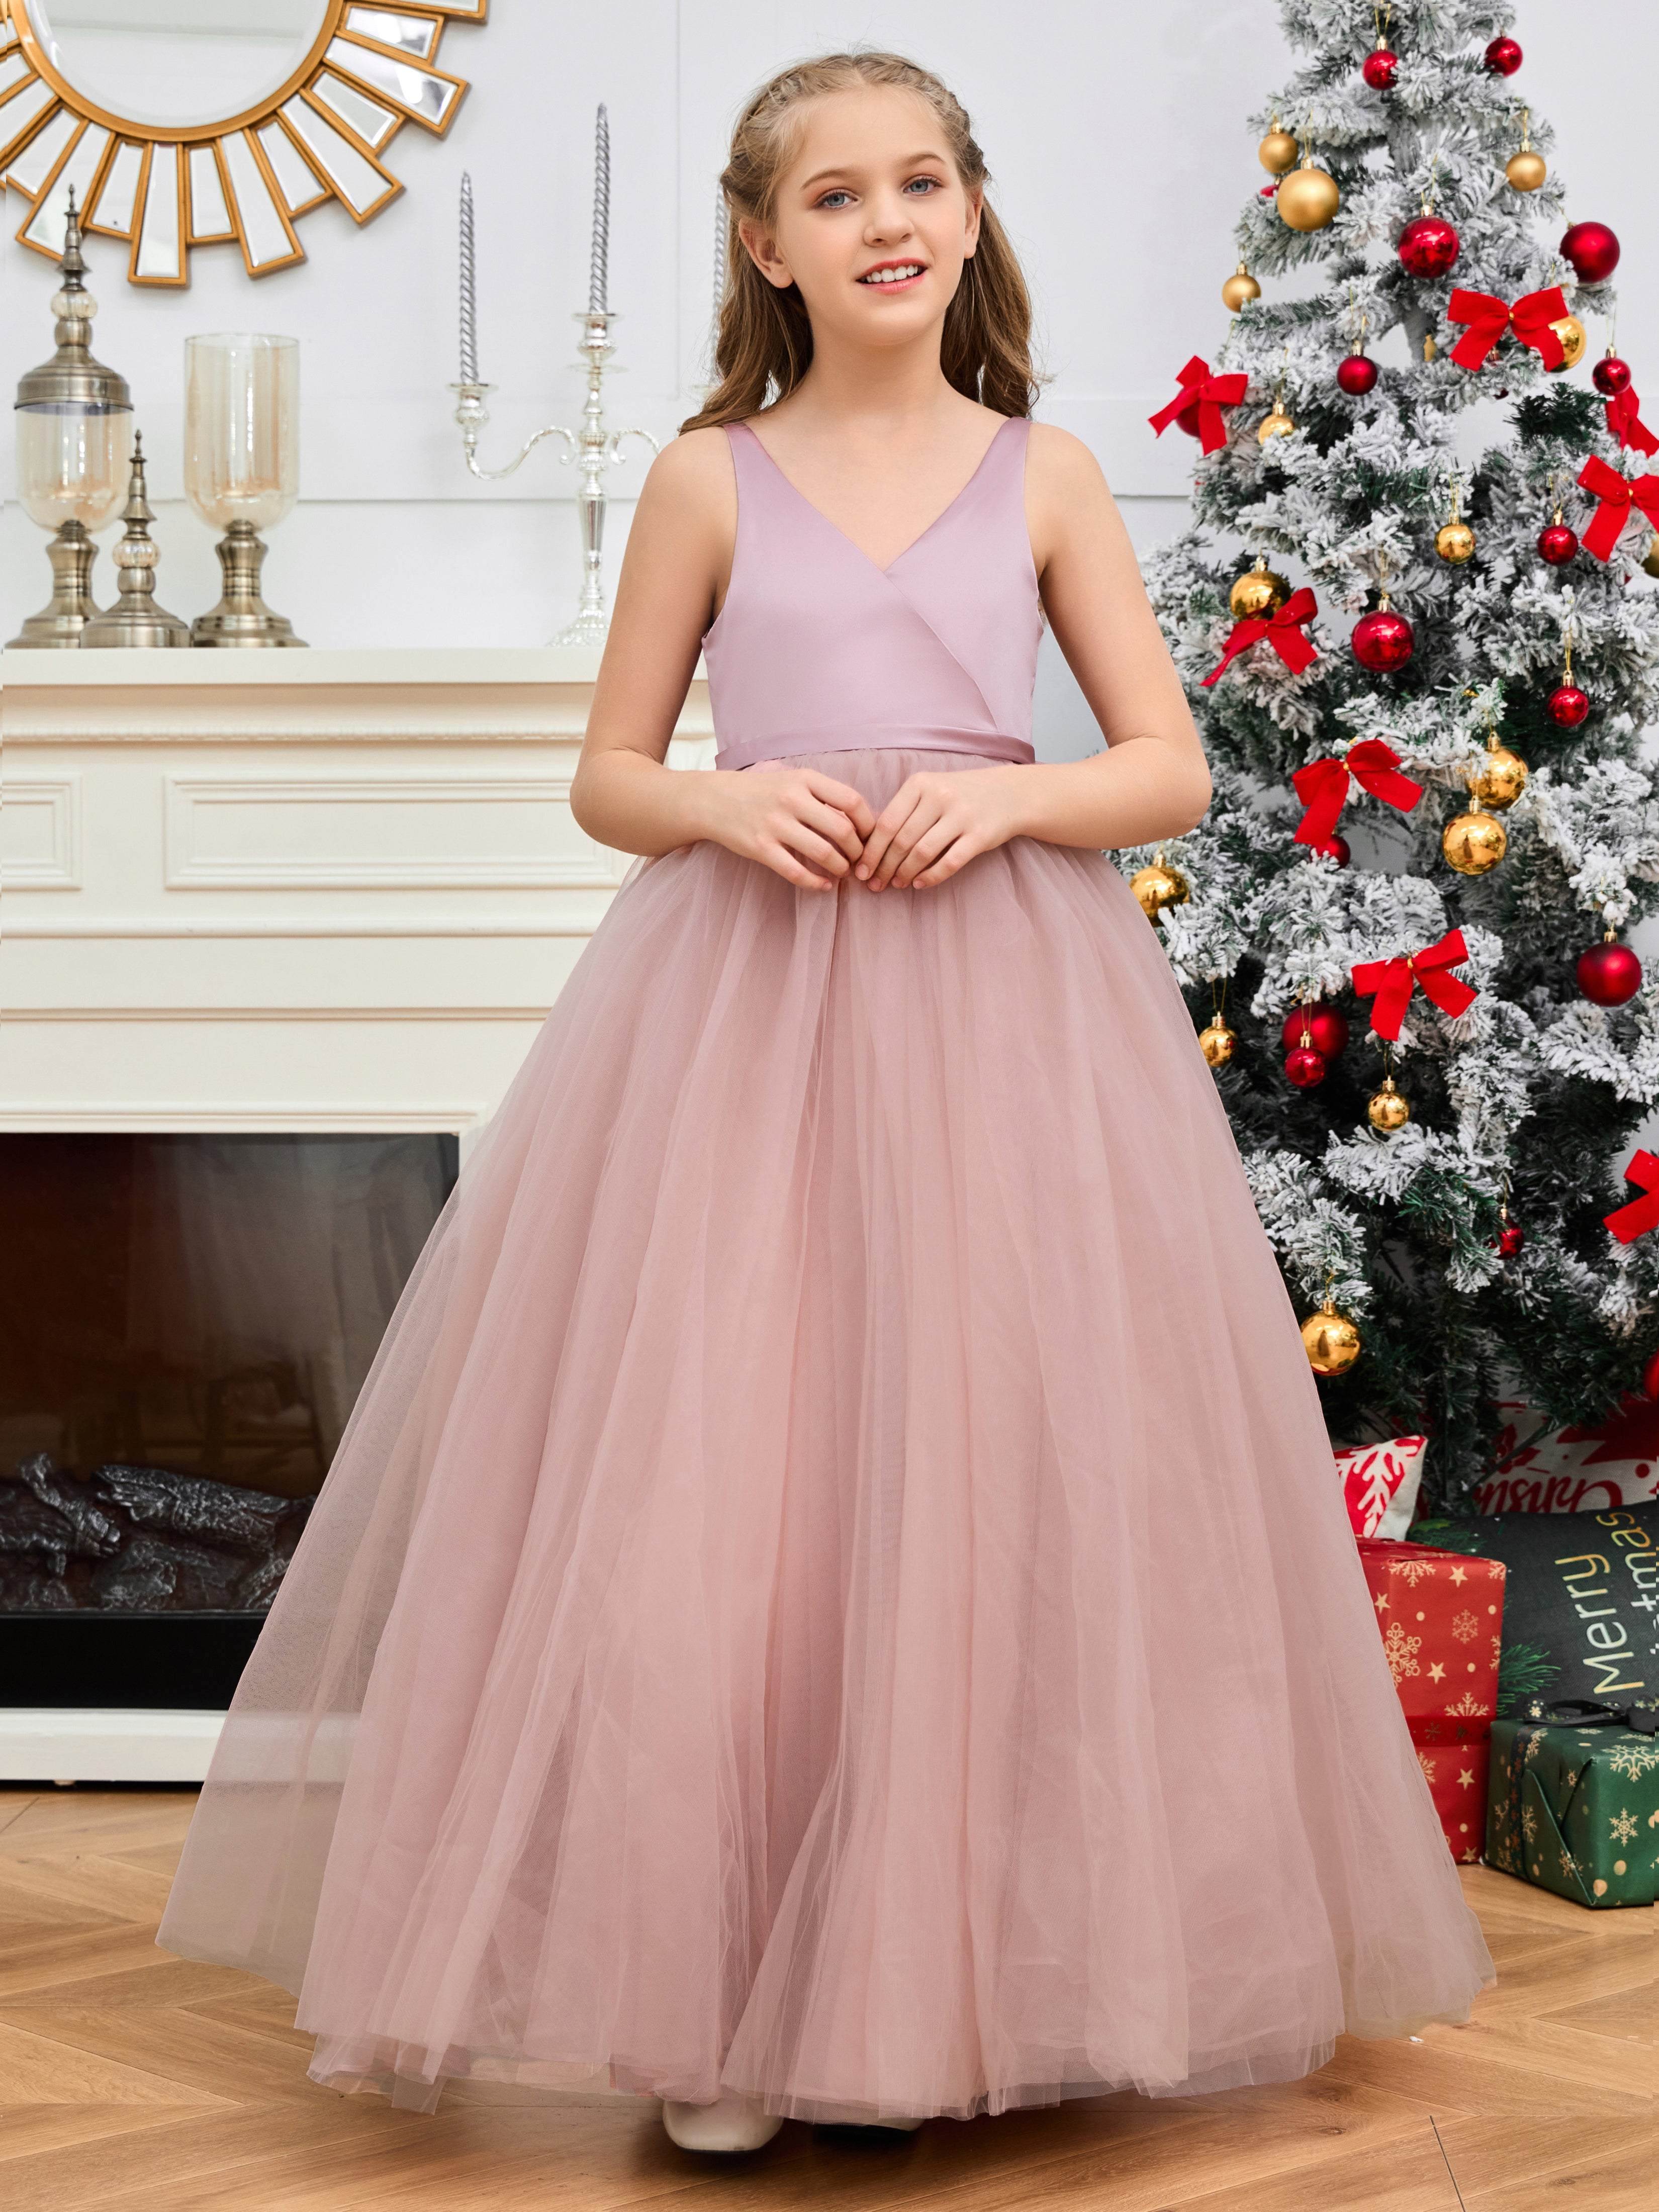 Cute Sleeveless Tulle Flower Girl Dress with Bow-Knot